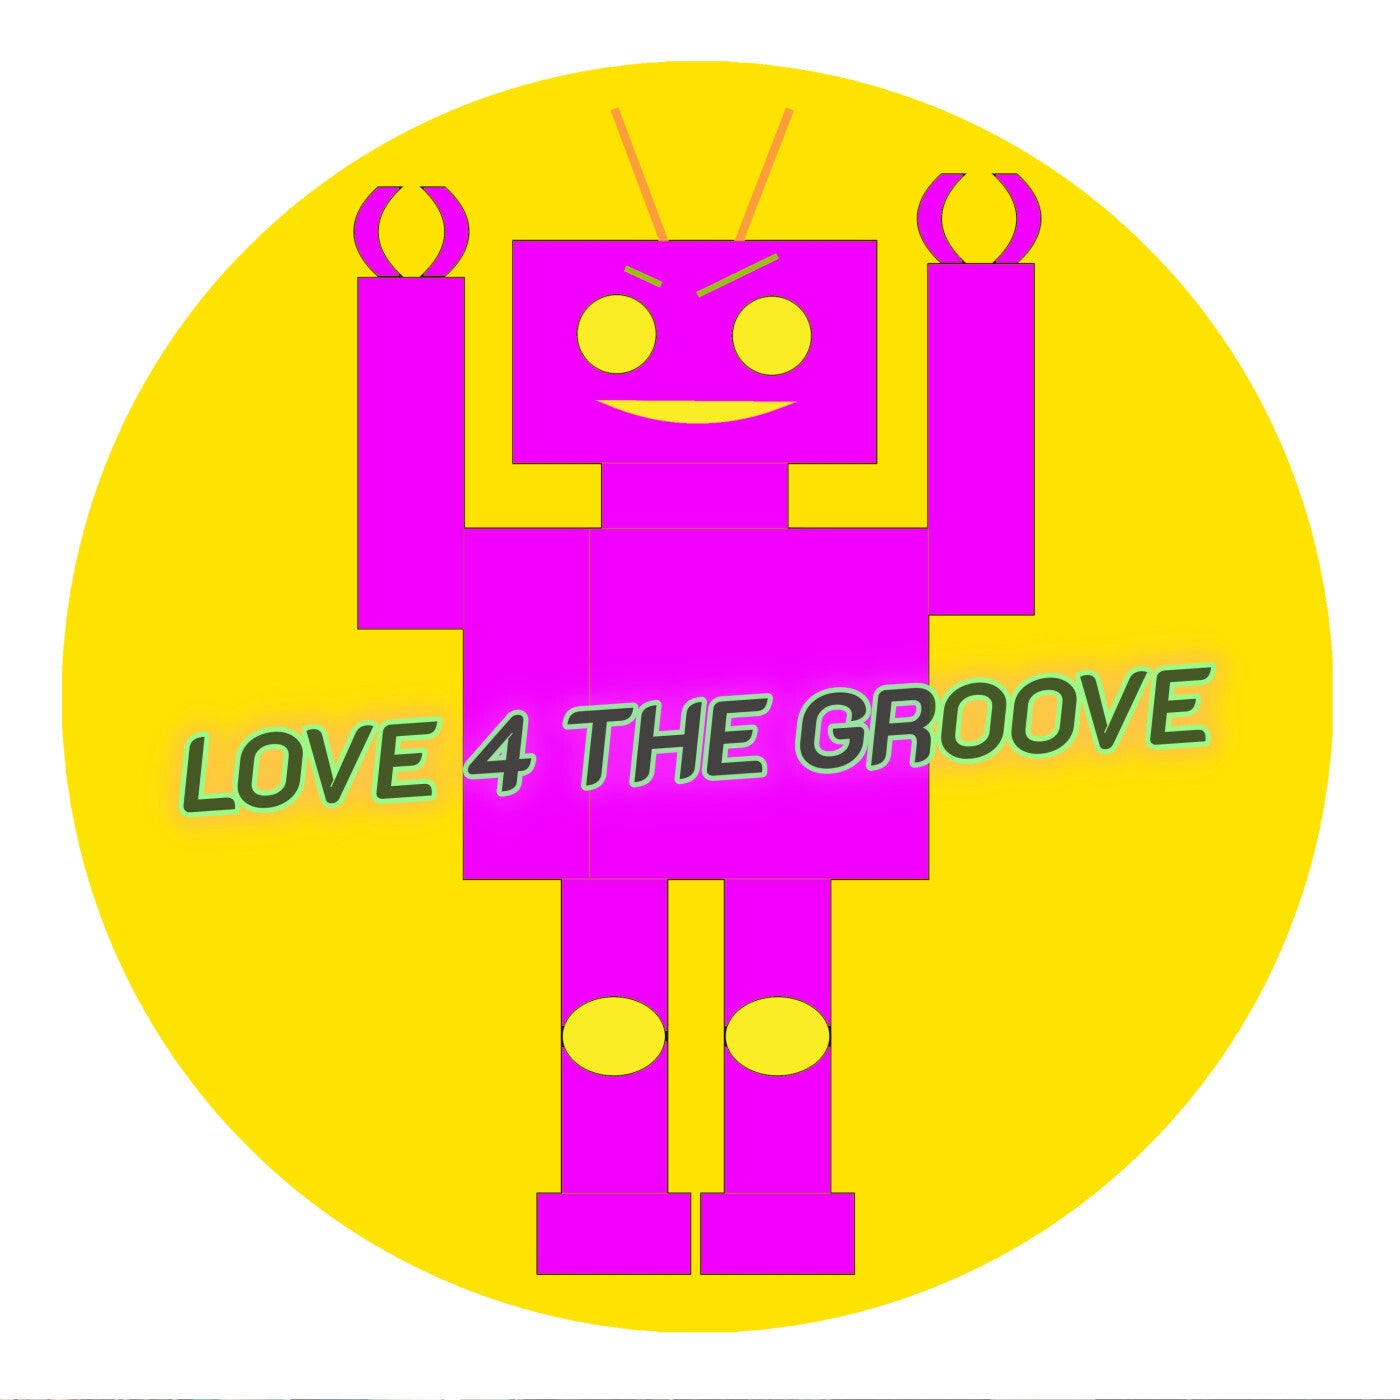 Love 4 The Groove